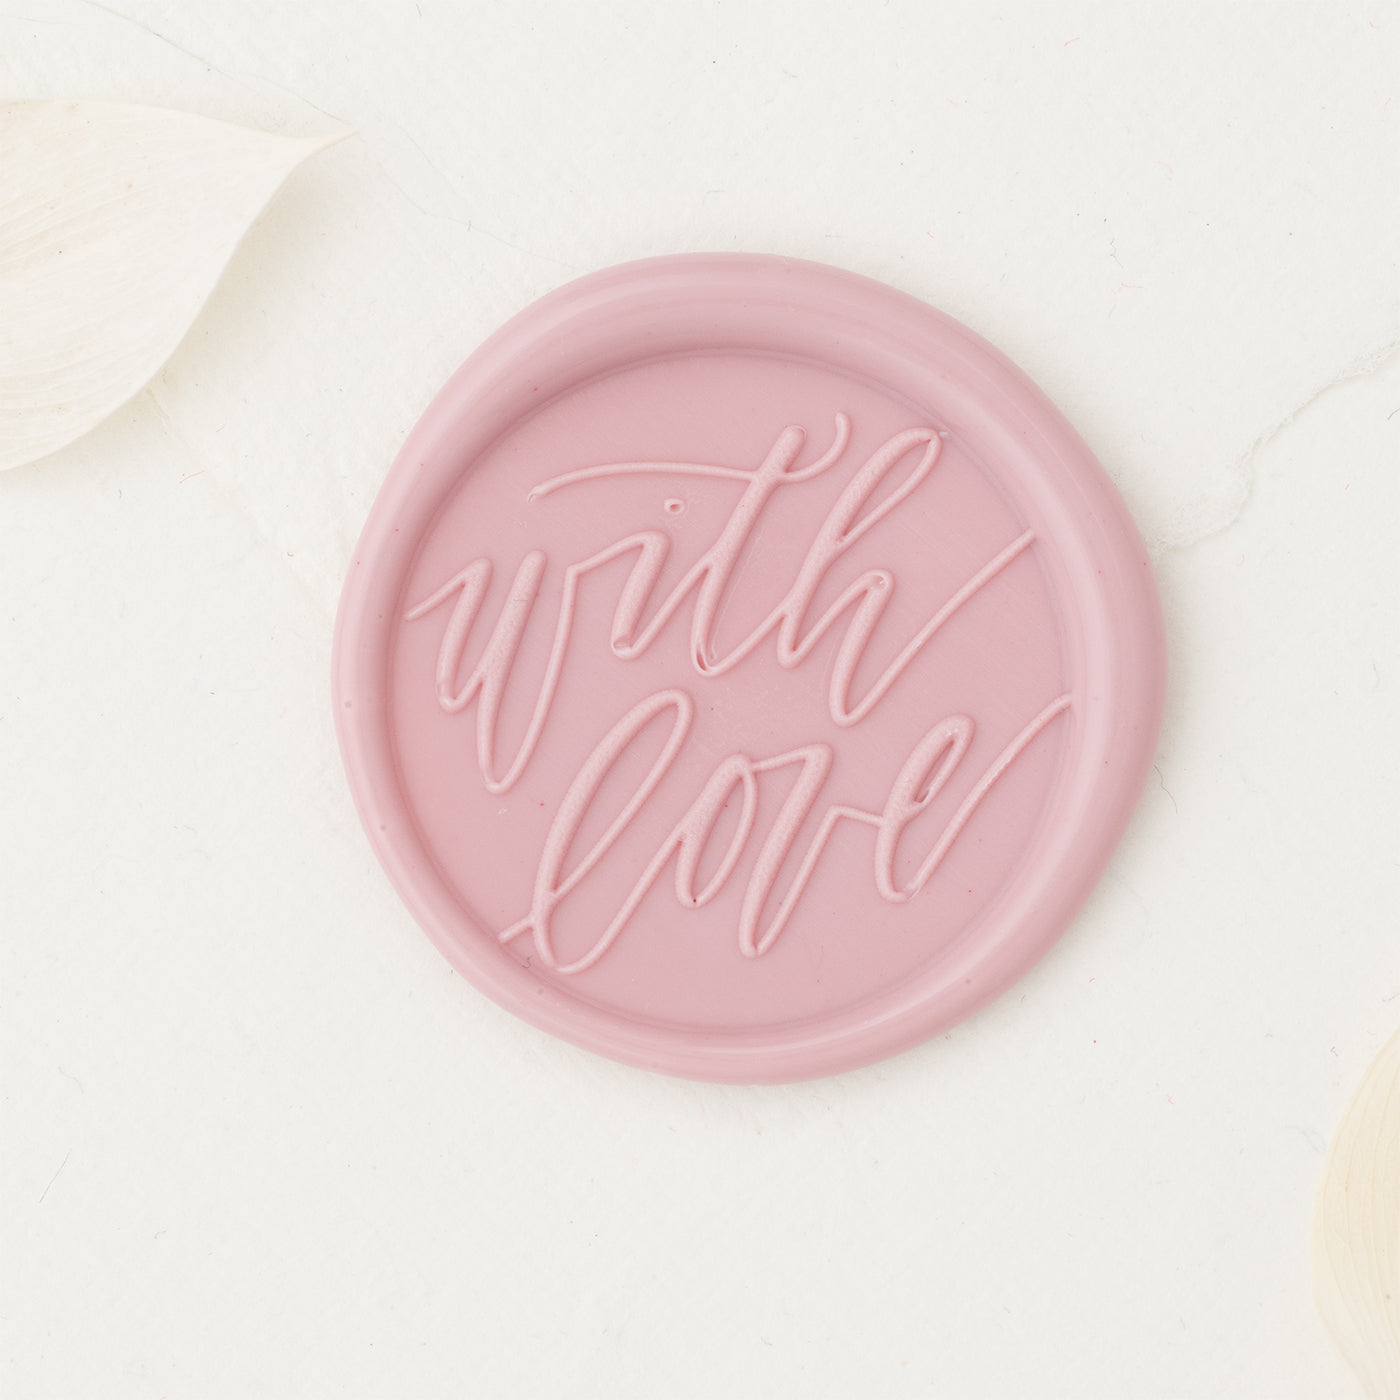 With Love Wax Seal Stamp Calligraphy Style Wax Stamp Wax Seal